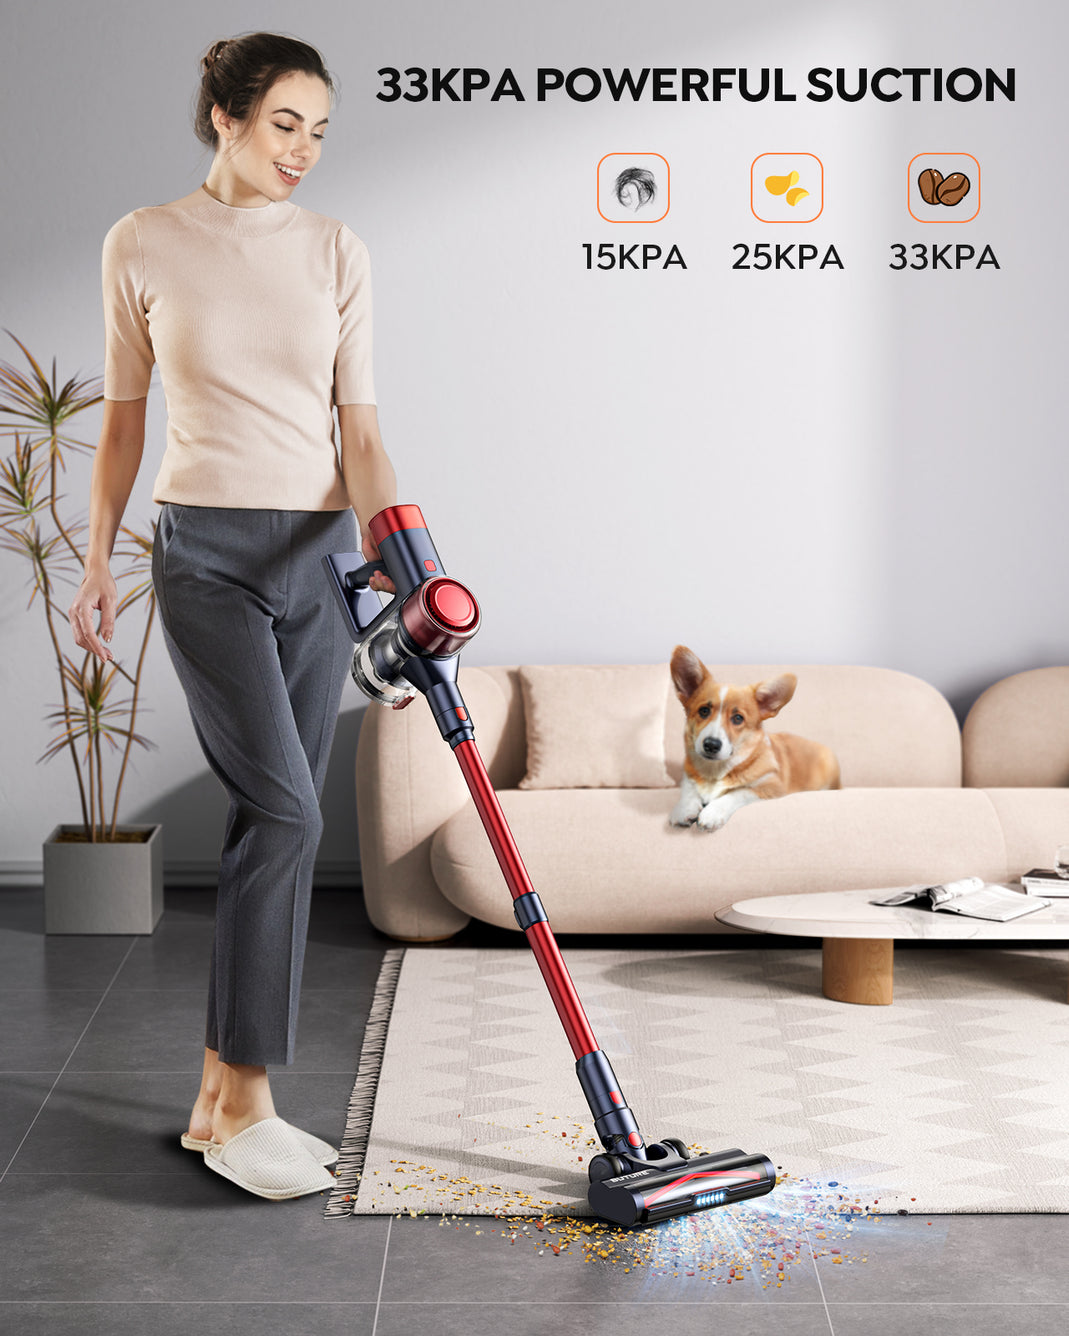 Buture Cordless Stick Vacuum Cleaner 55mins 450W 38Kpa with Touch